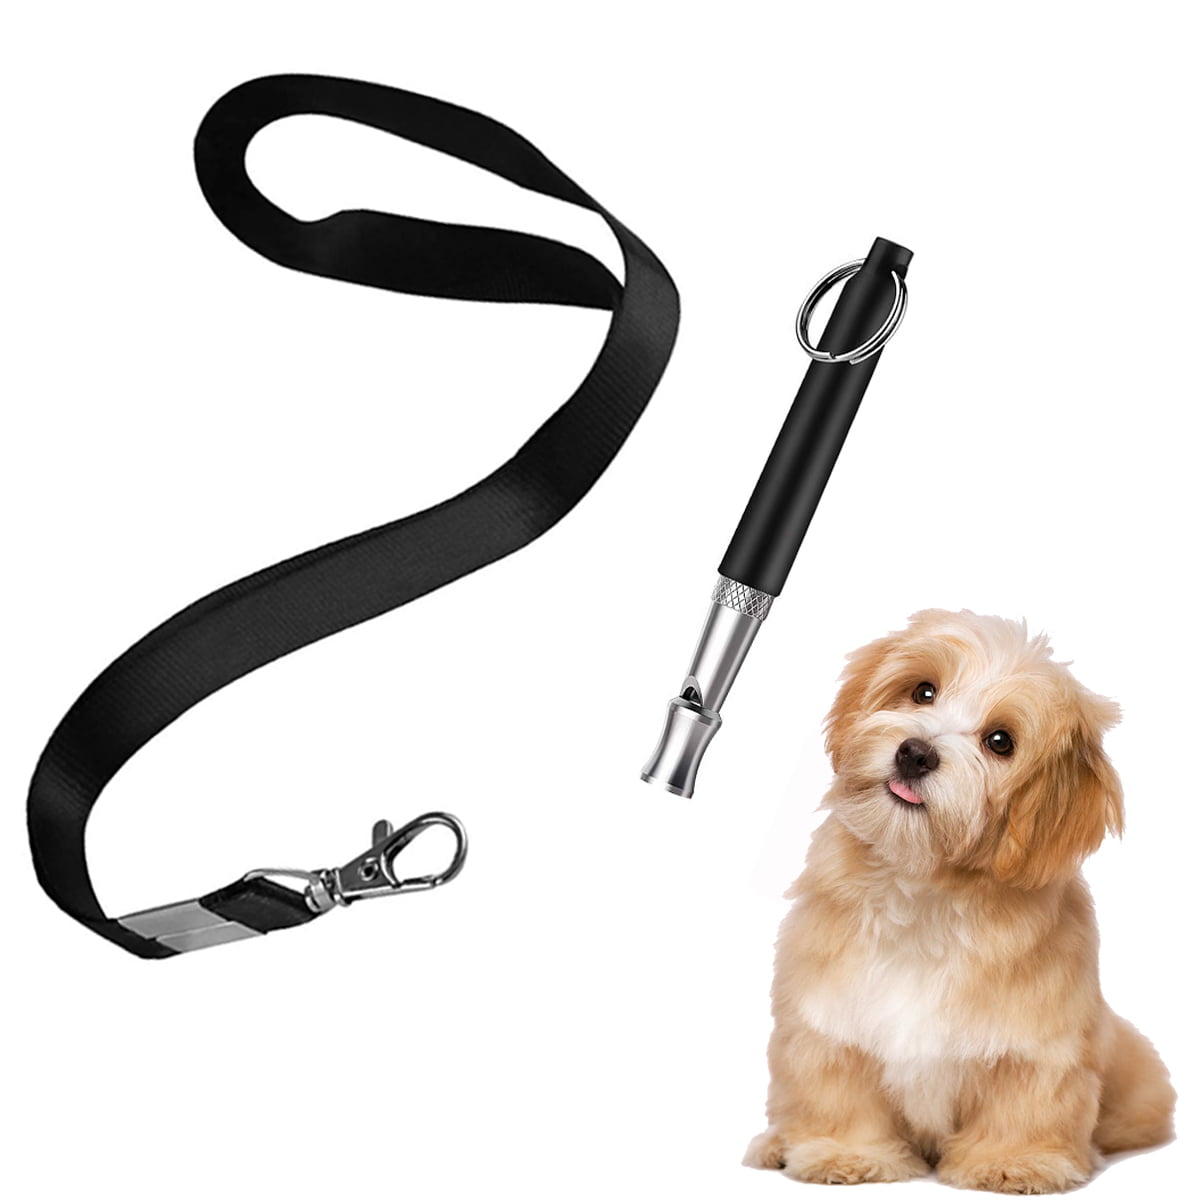 LEFUYAN Professional Training Dog Whistle Tool Can Adjust The Sound The Anti-Barking Training Tool Can Stop The Dog from Barking Stainless Steel Material Can Adjust The High Sound Quality 